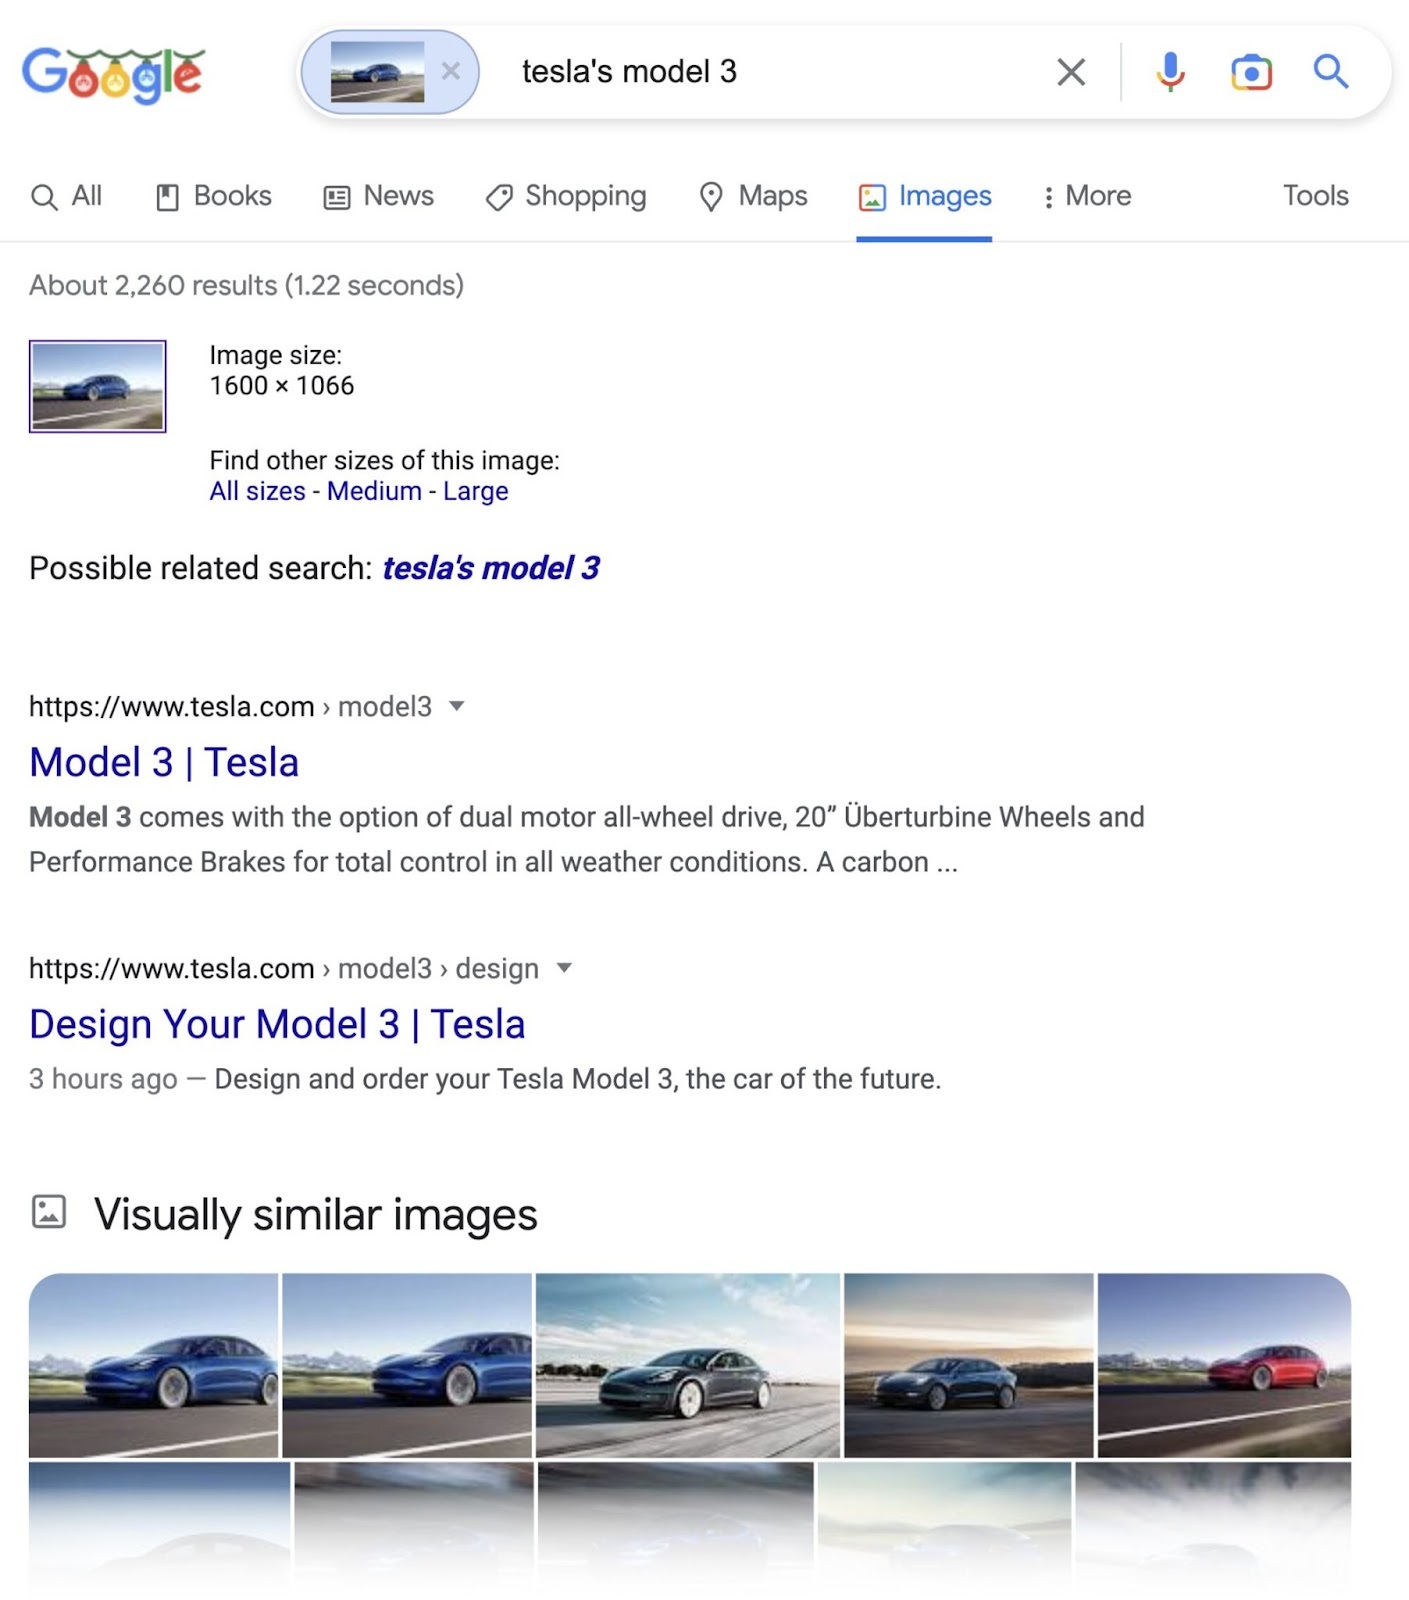 reverse image search in visual search